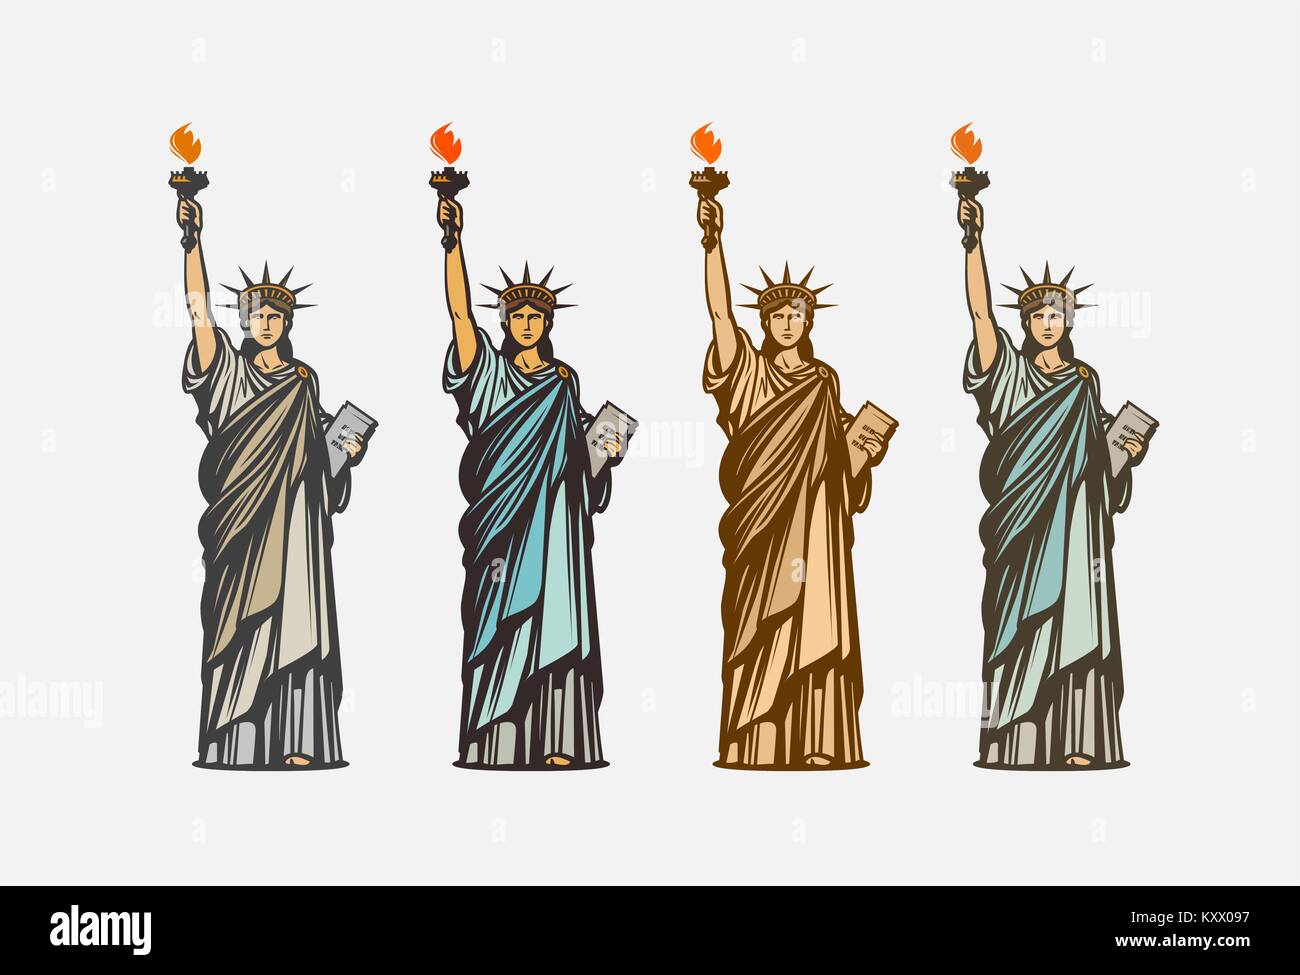 Famous statue of liberty. Symbol United States of America. Vector illustration Stock Vector